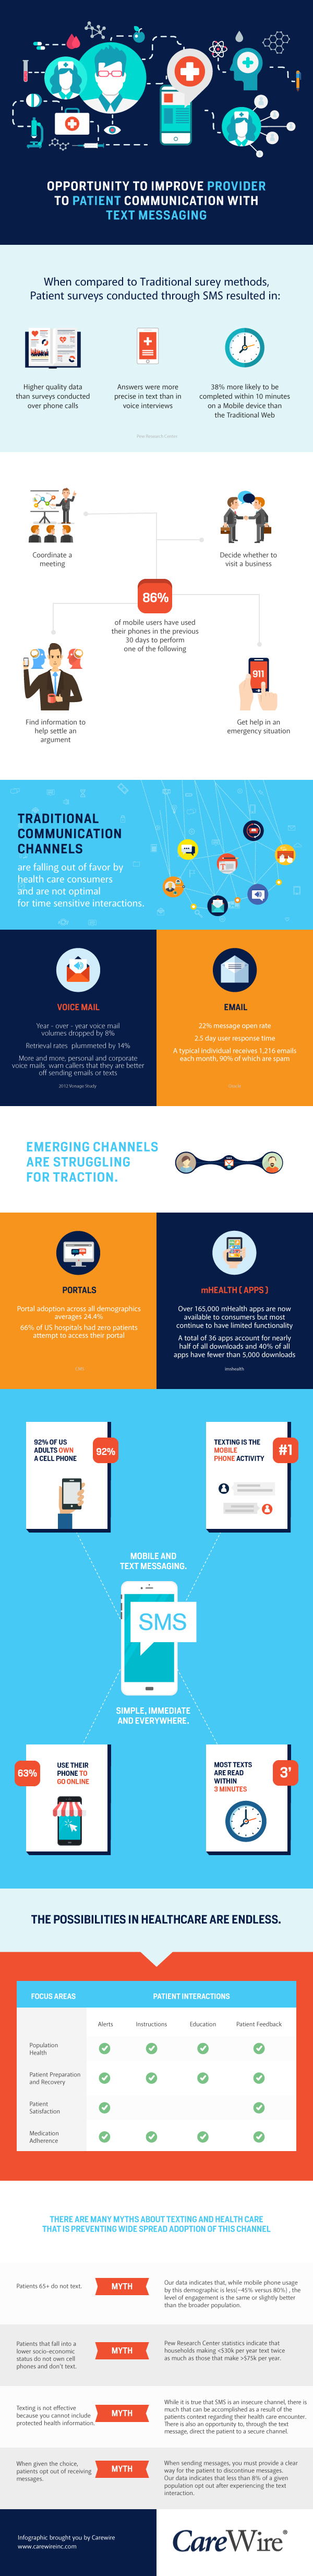 Carewire infographic final